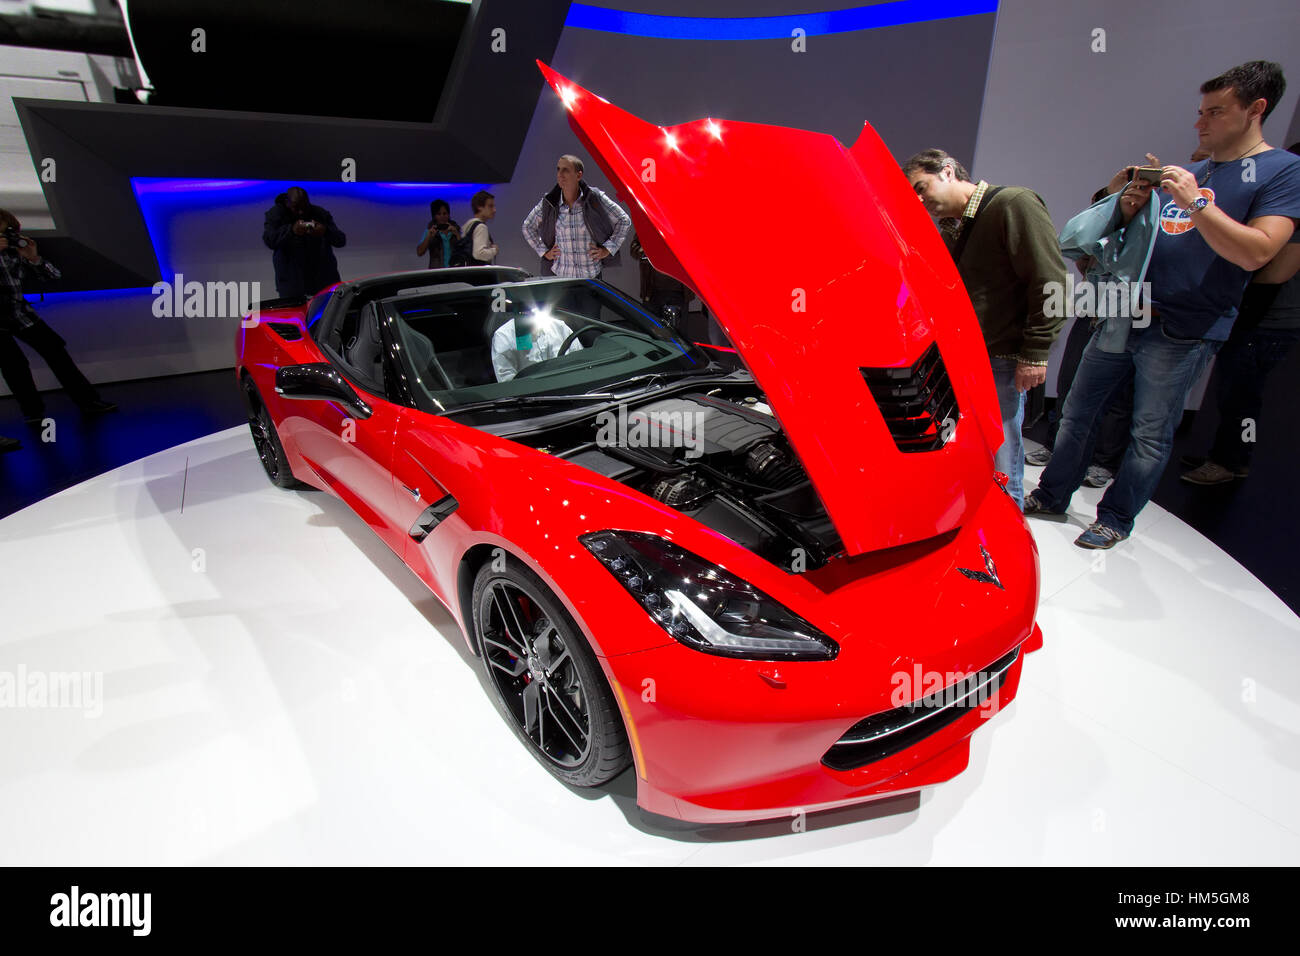 FRANKFURT, GERMANY - SEP 20: Chevrolet Corvette Stingray at the IAA motor show on Sep 20, 2013 in Frankfurt. More than 1.000 exhibitors from 35 countr Stock Photo